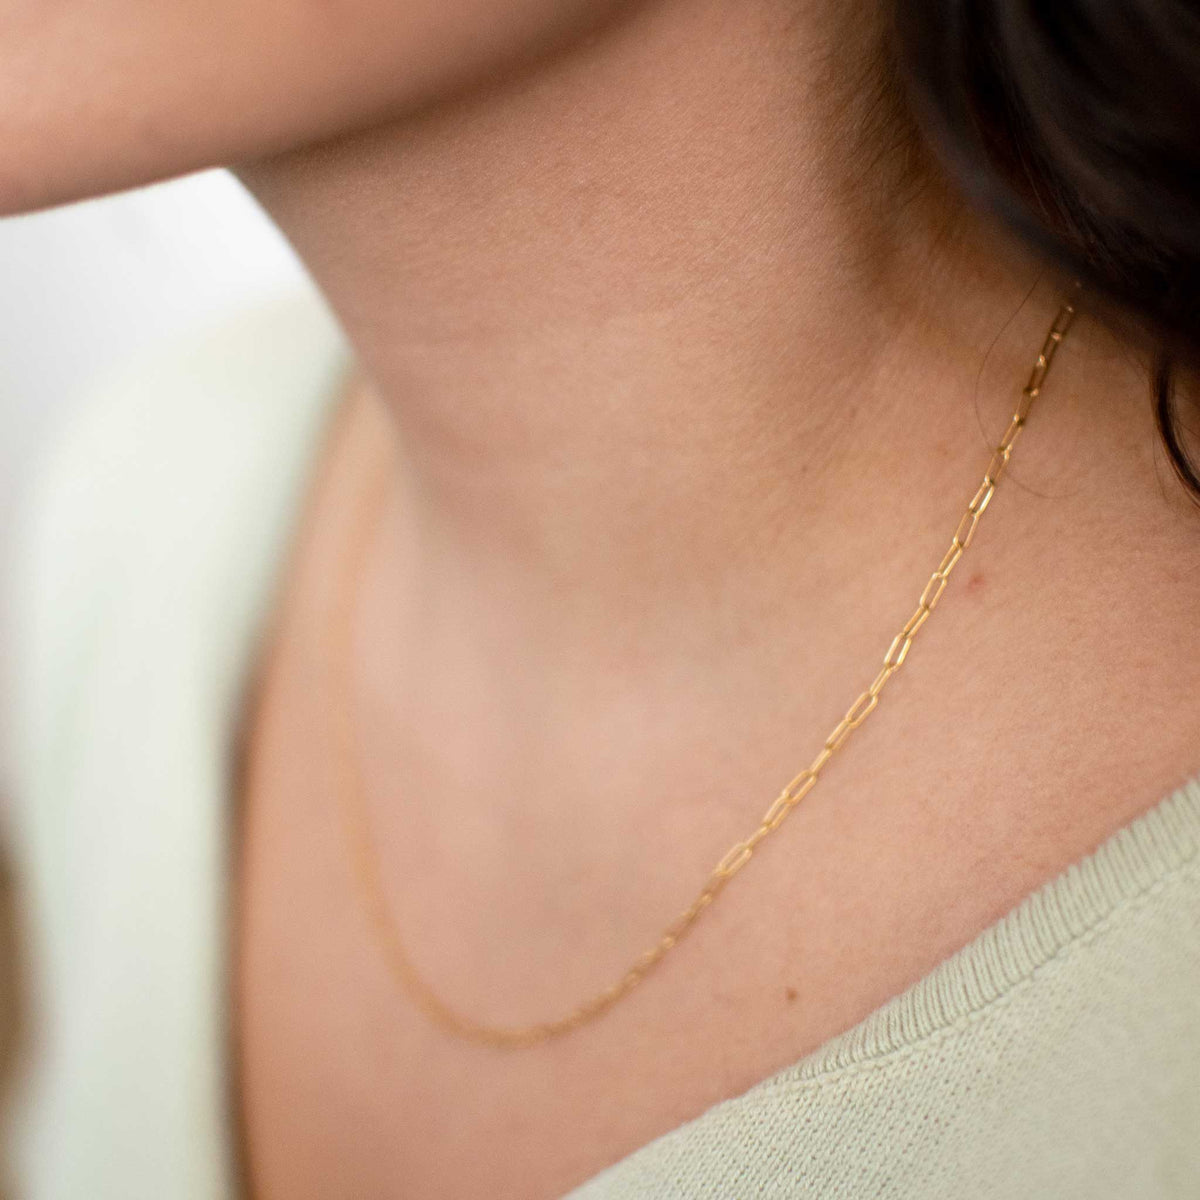 Up close of the small chain necklace worn by a woman.